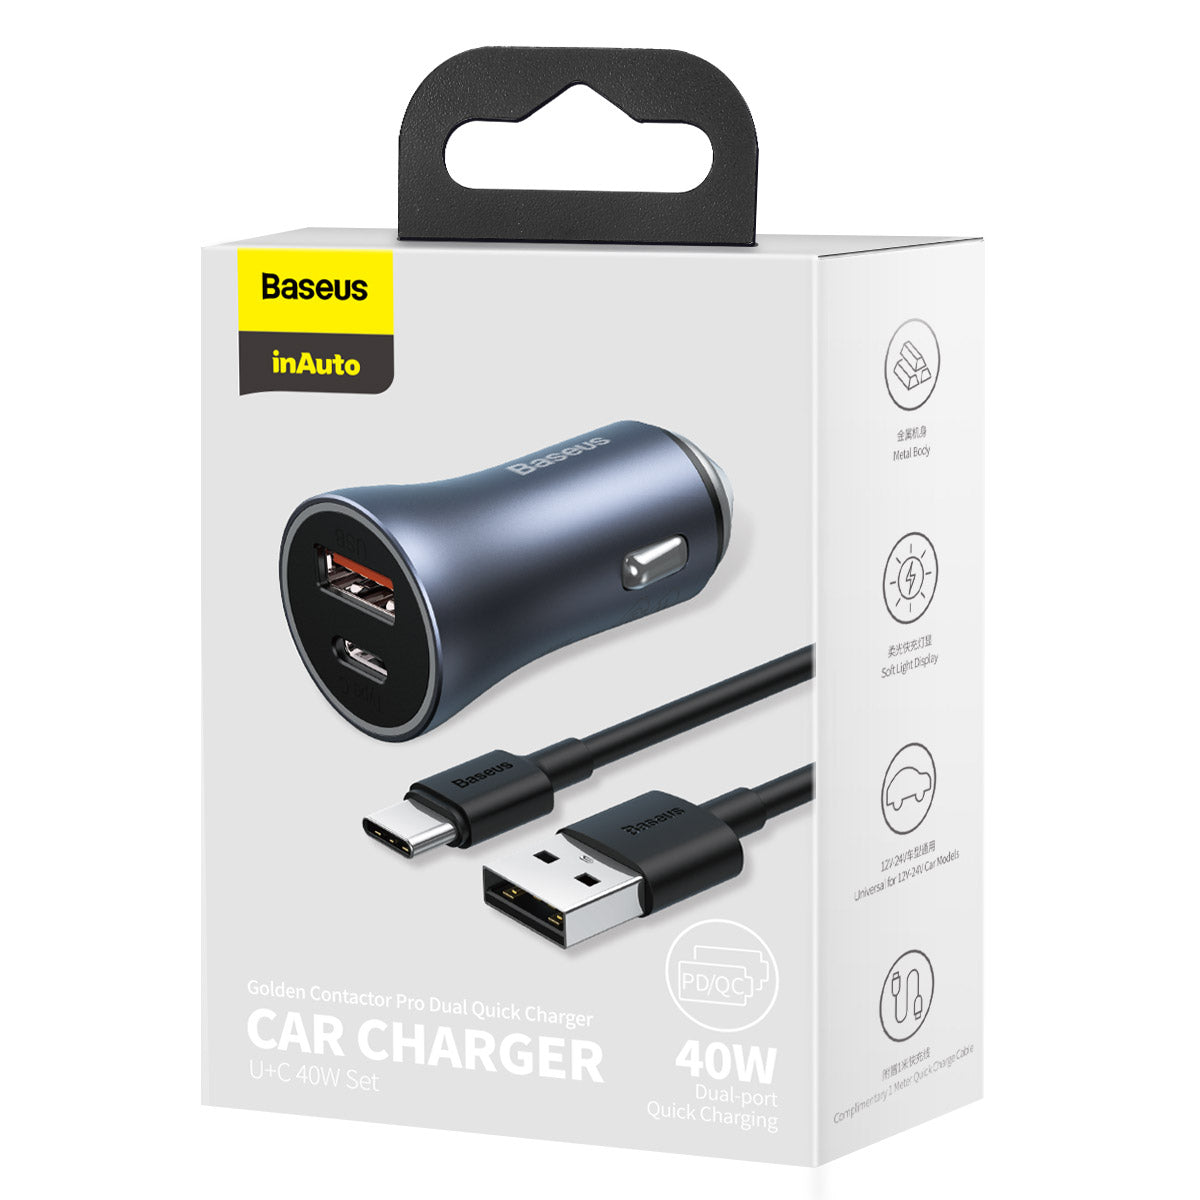 Baseus Golden Contactor Pro Fast Car Charger USB Type C / USB 40 W Power Delivery 3.0 Quick Charge 4+ SCP FCP AFC + USB Cable - USB Type C Grey (TZCCJD-0G)